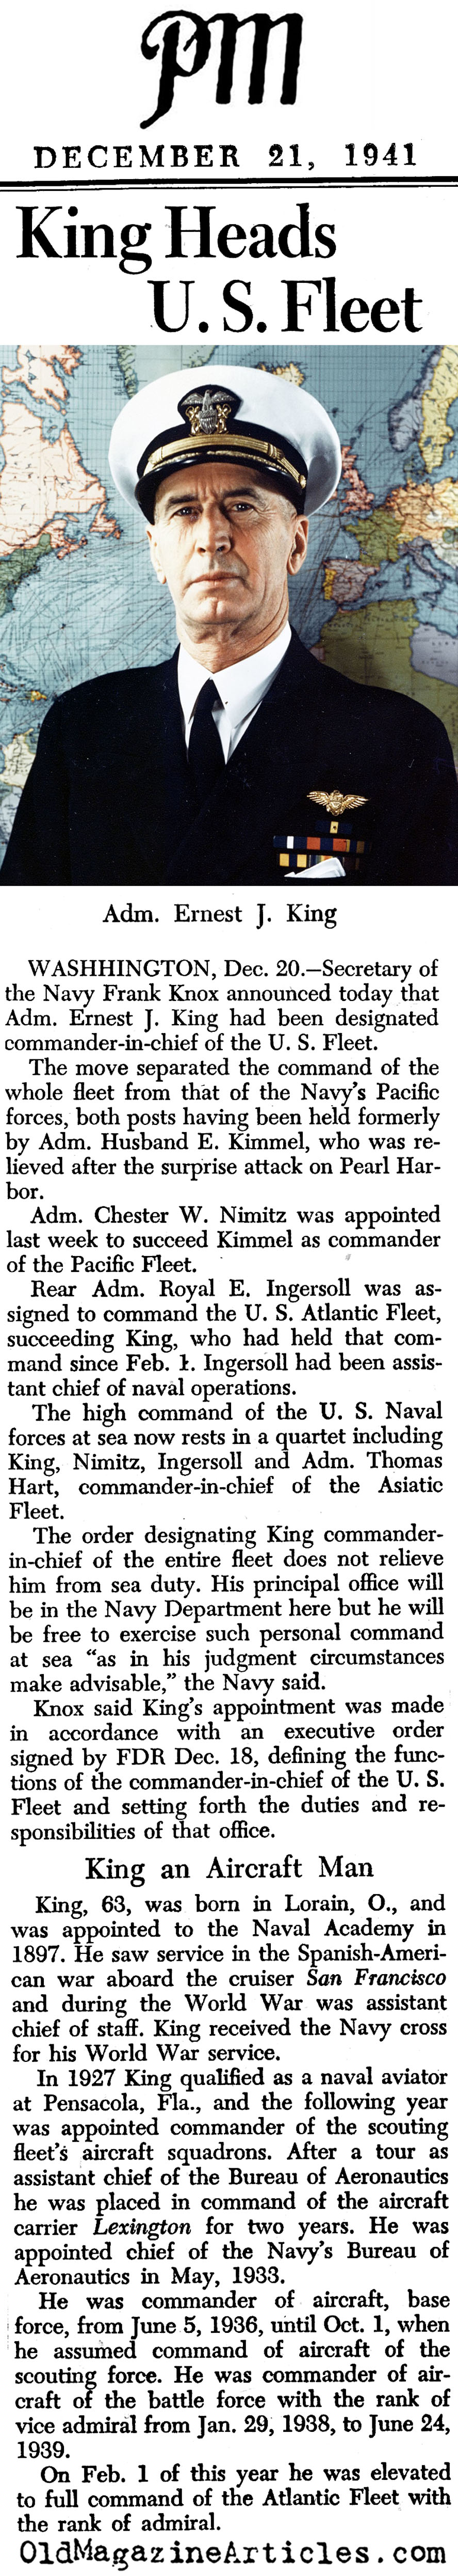 King Named to Lead Fleet (PM Tabloid, 1941)